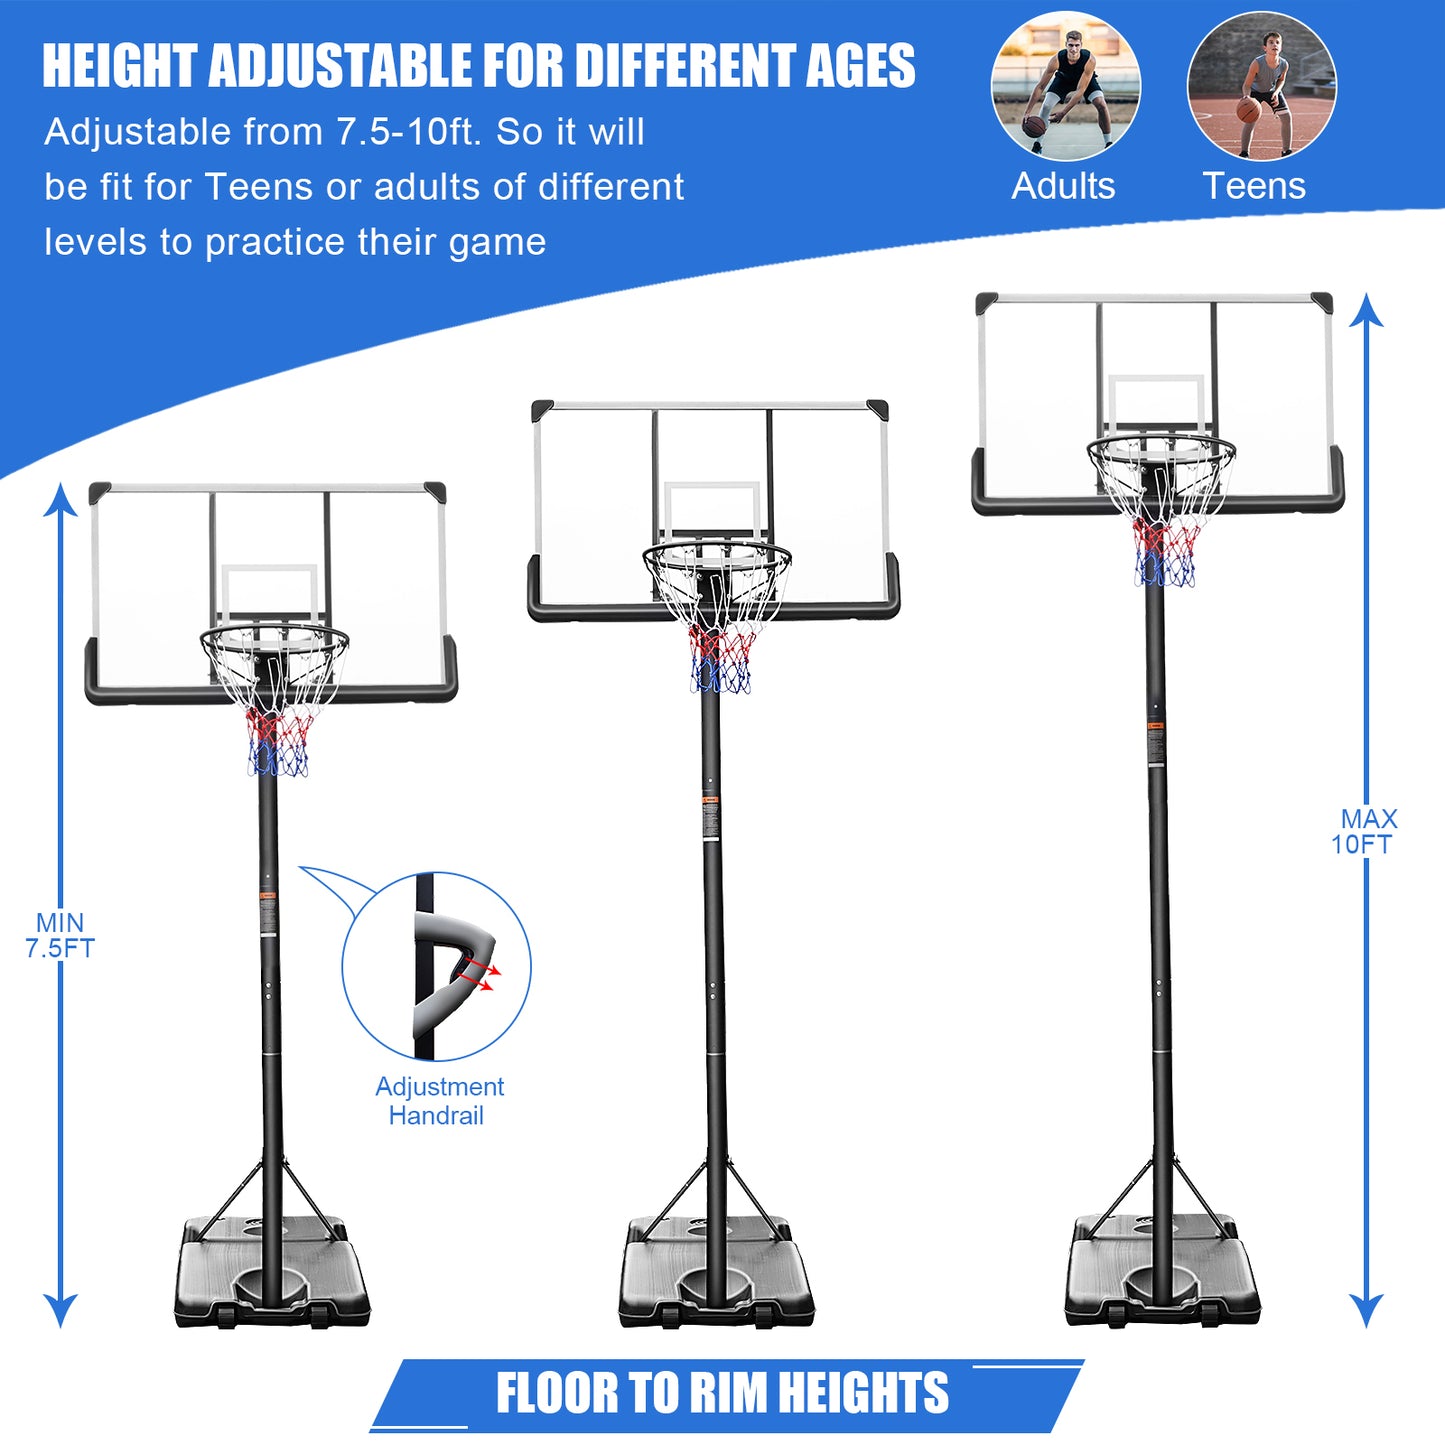 Portable Basketball Hoop Backboard System Stand Height Adjustable 7.5ft - 10ft with 48 Inch Backboard and Wheels for Adults Teens Outdoor Indoor Basketball Goal Game Play Set